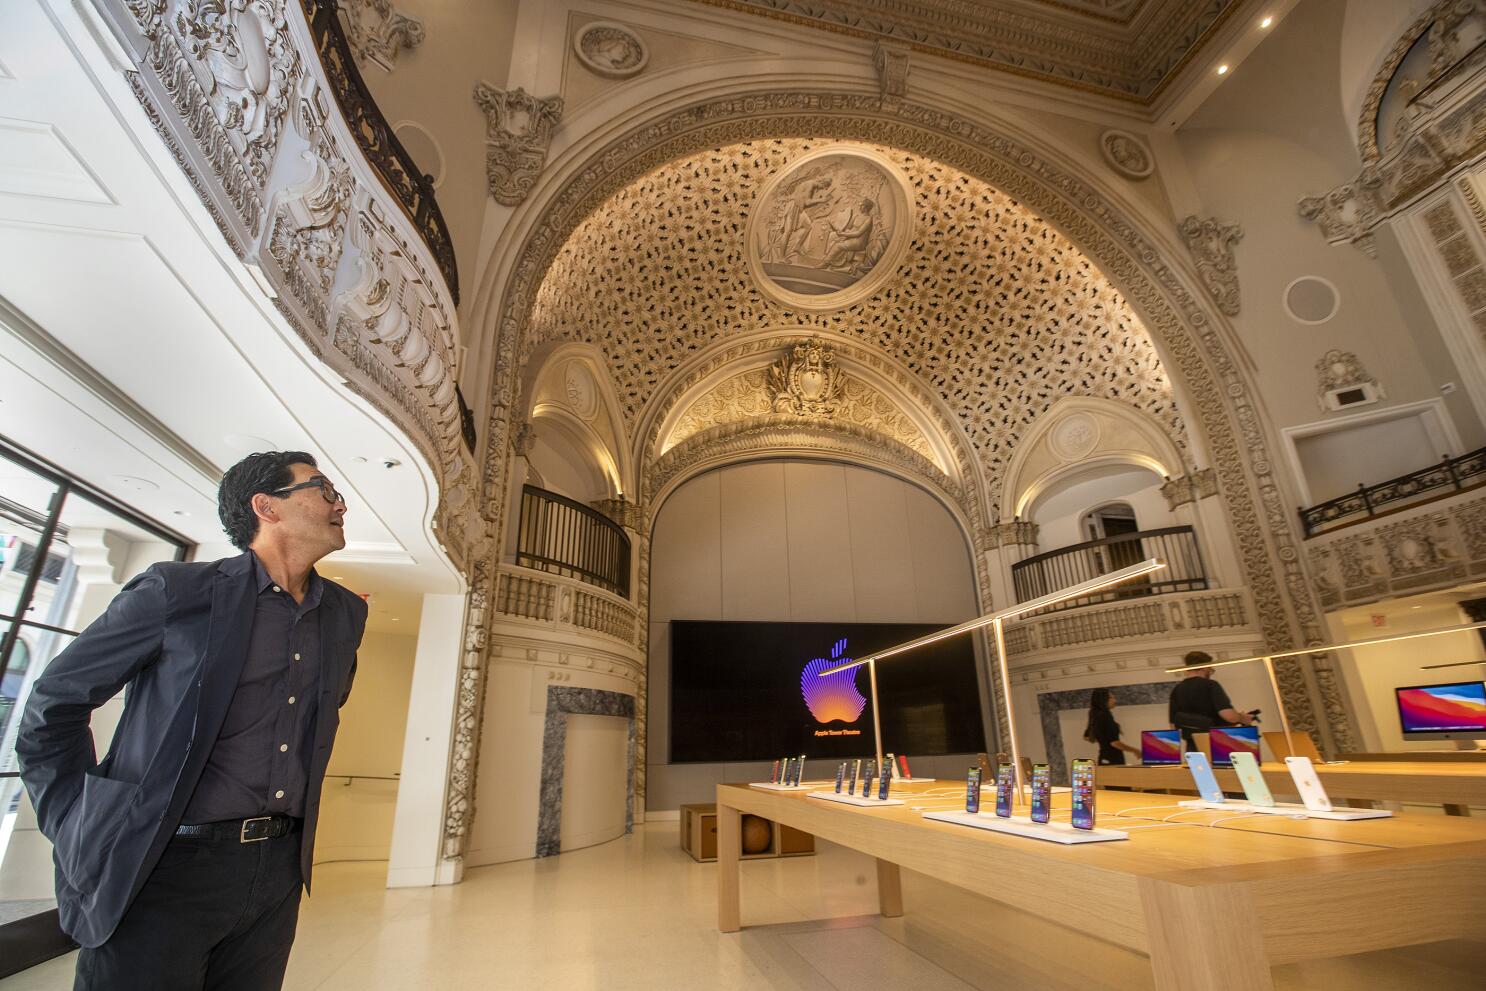 Inside Apple Grand Central retail: The Apple Store on a balcony